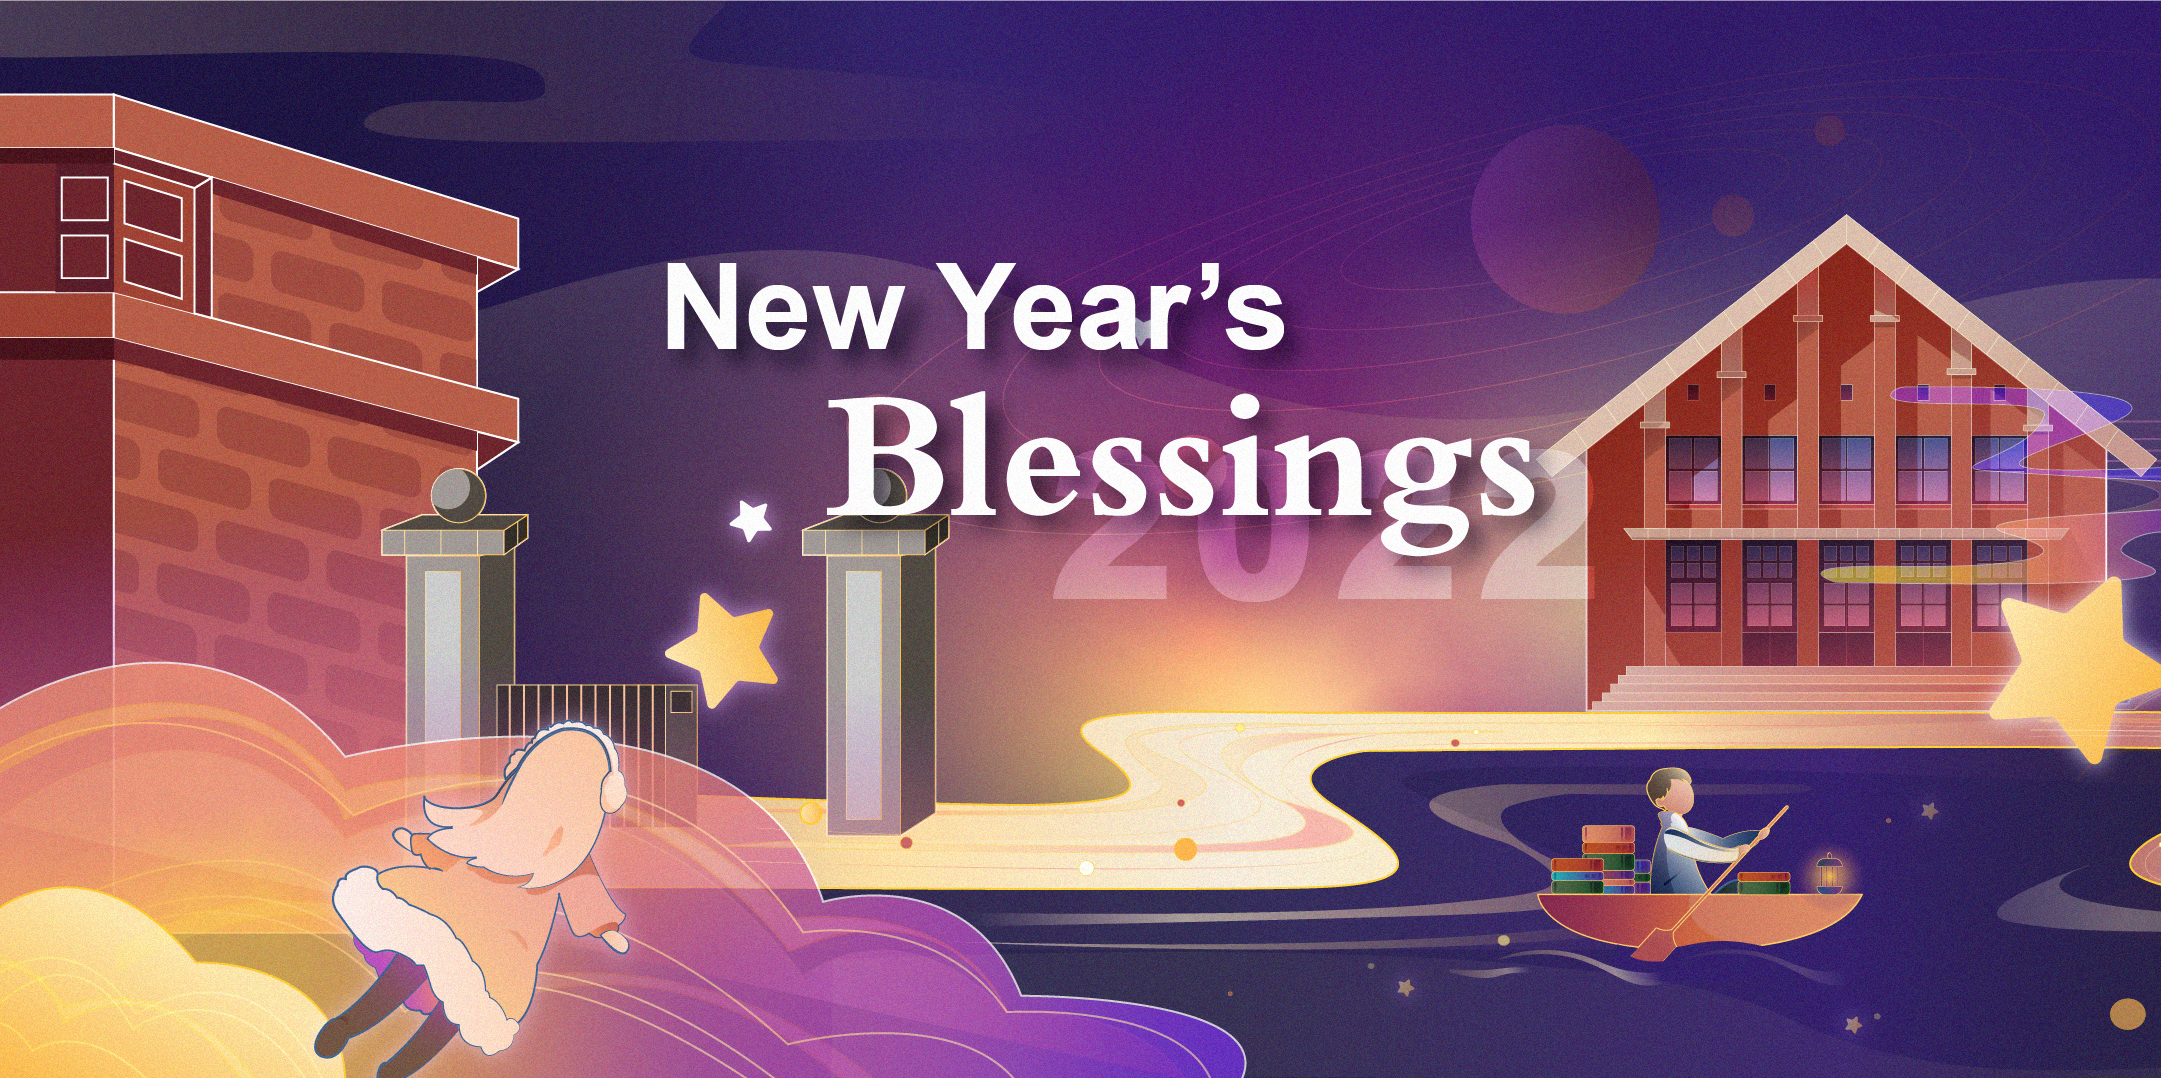 New Year's Blessing